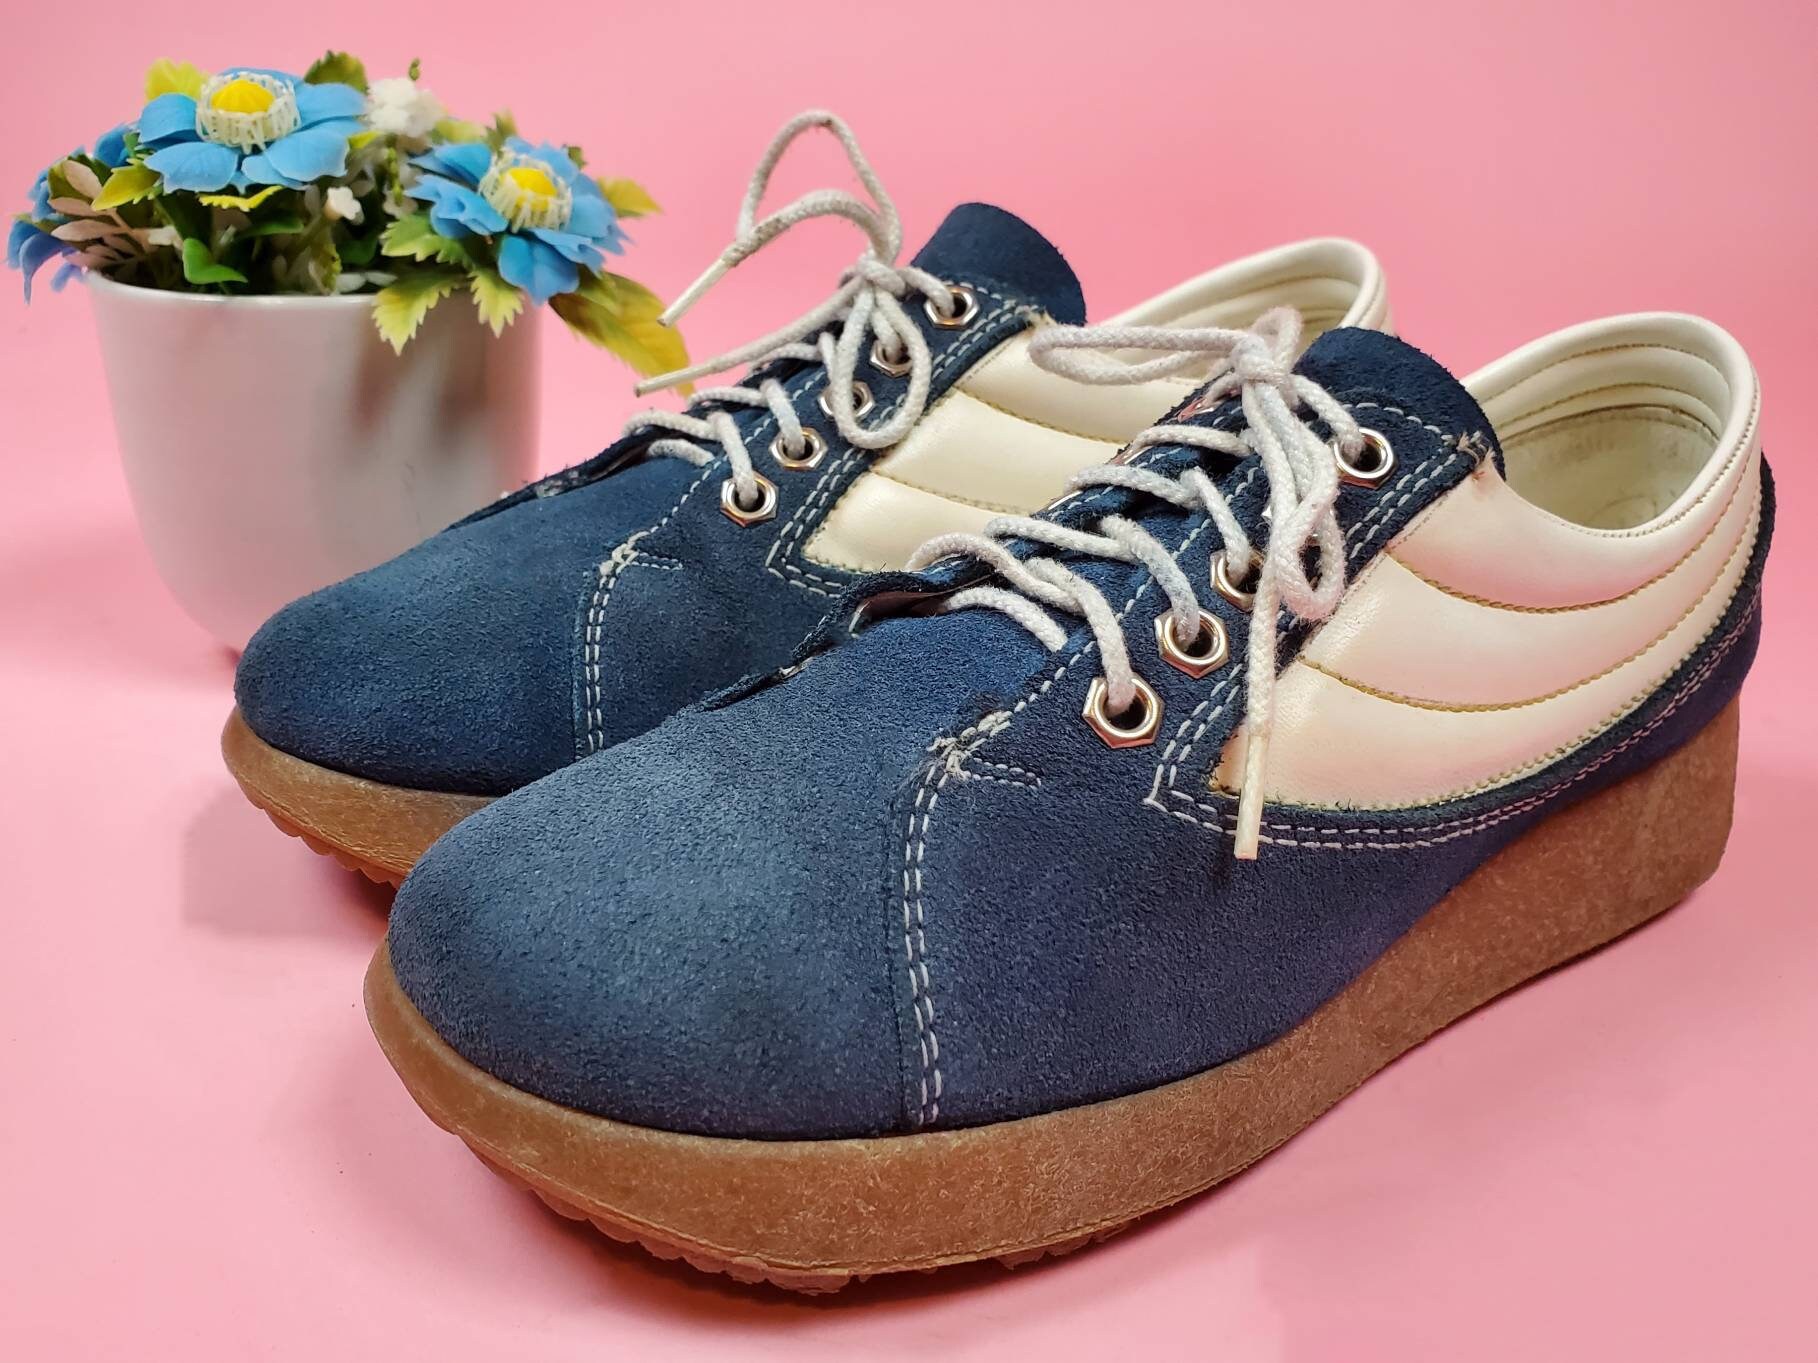 60s/70s Mod Sneaker Comfort Shoes. Blue Suede Shoes by | Etsy